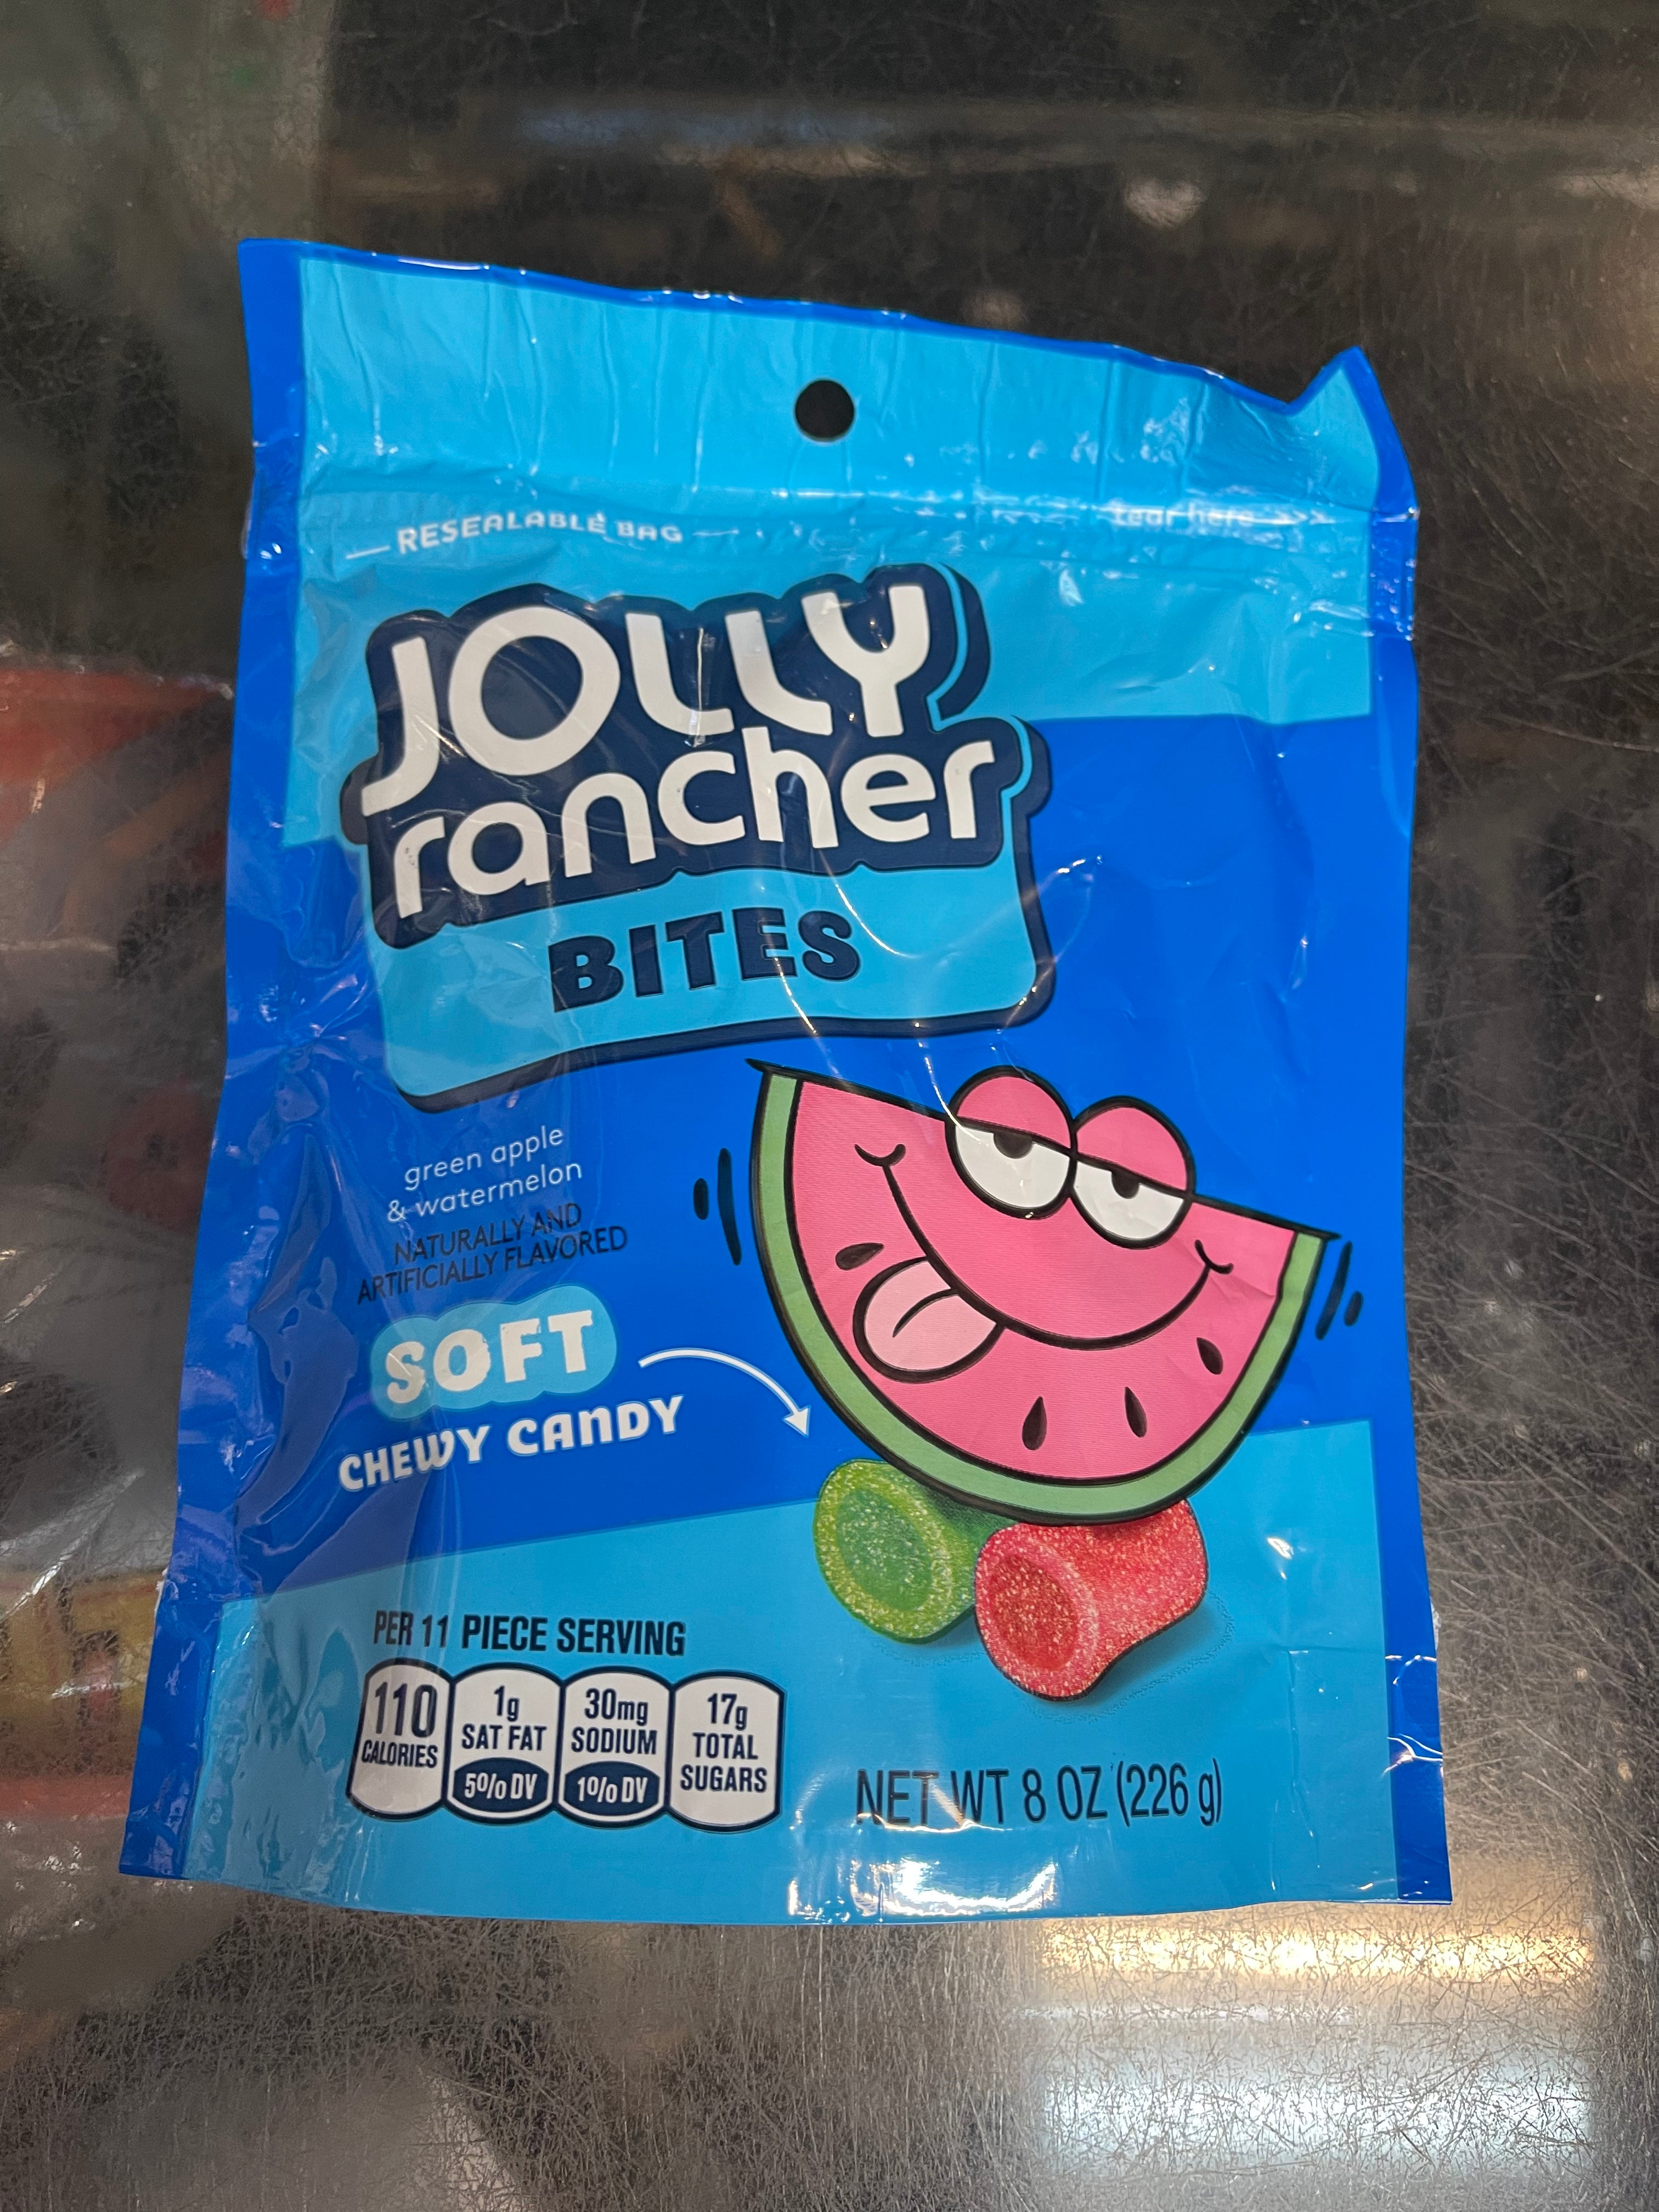 jolly rancher bites soft chewy candy